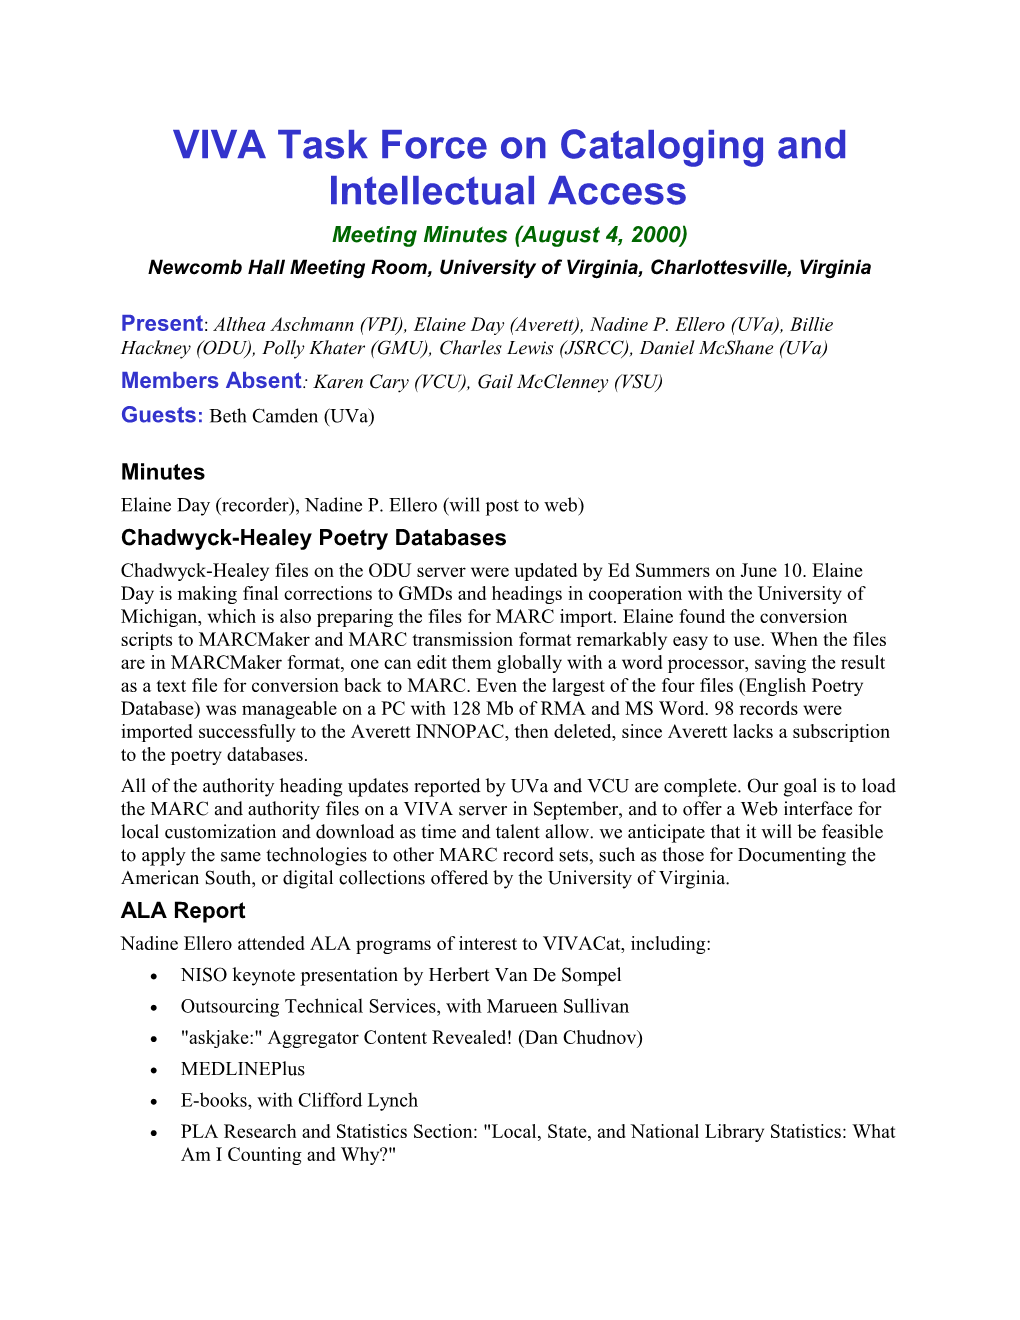 VIVA Task Force on Cataloging and Intellectual Access